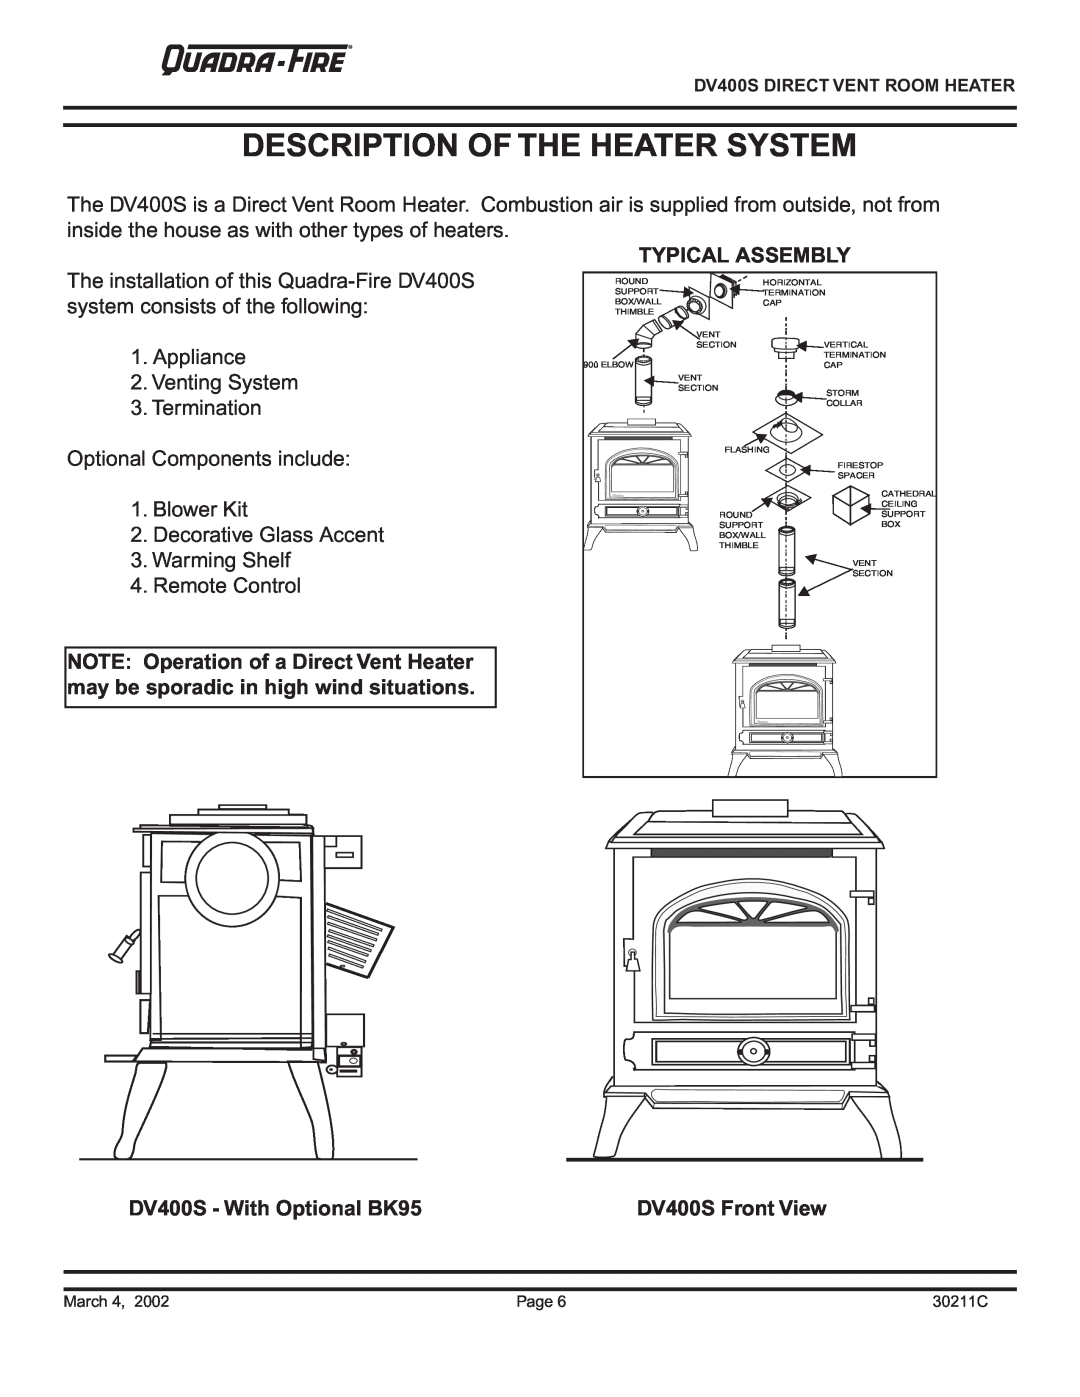 Quadra-Fire owner manual Description Of The Heater System, Typical Assembly, DV400S - With Optional BK95 